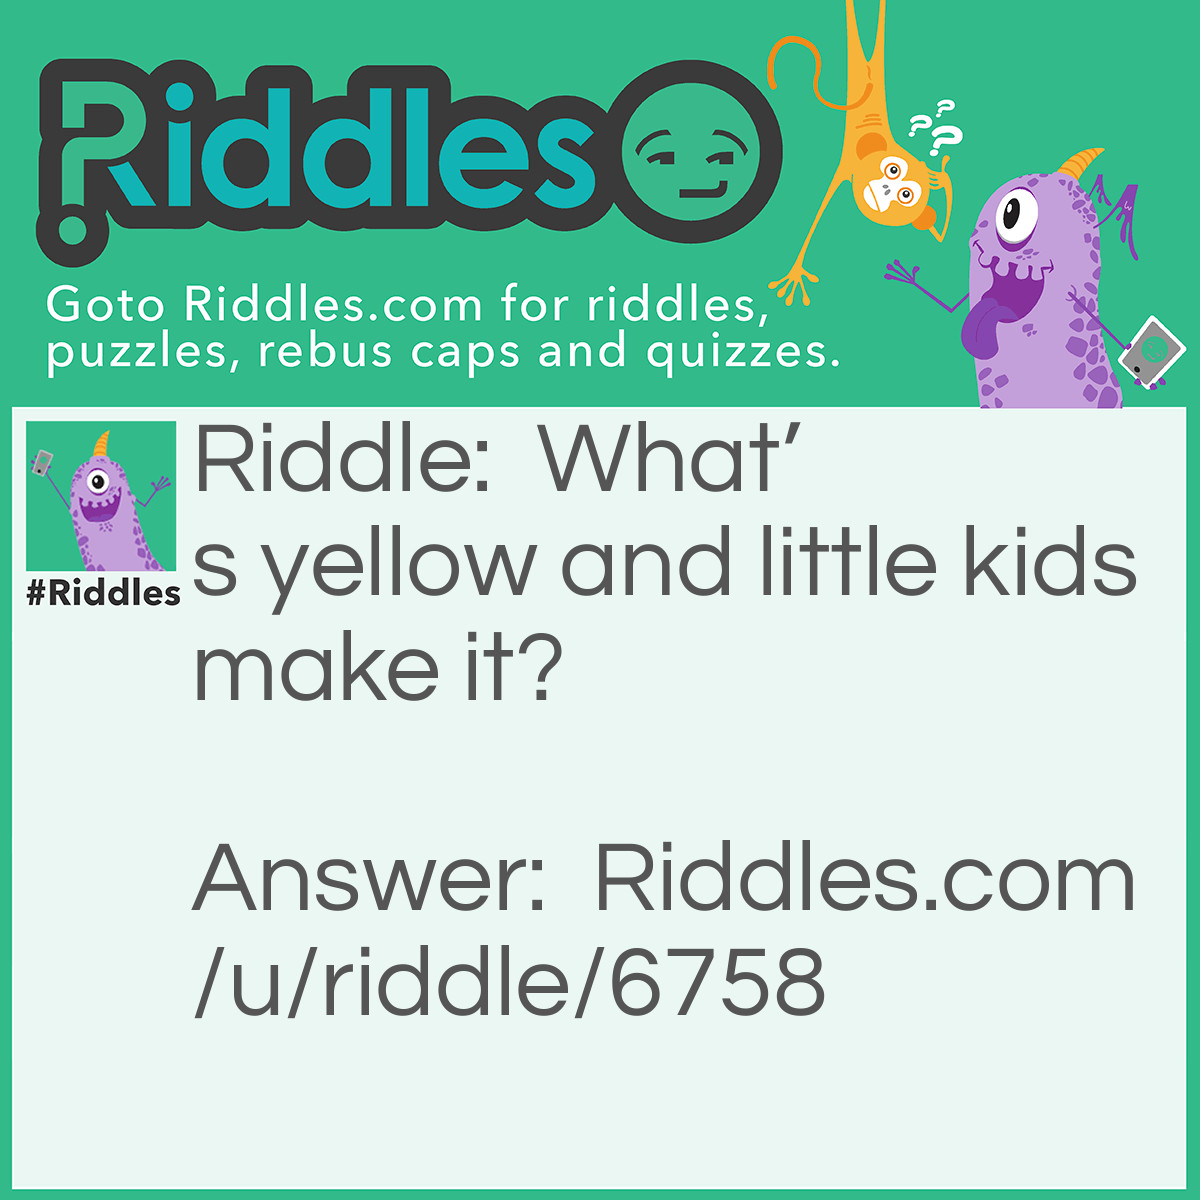 Riddle: What's yellow and little kids make it? Answer: Lemonade.